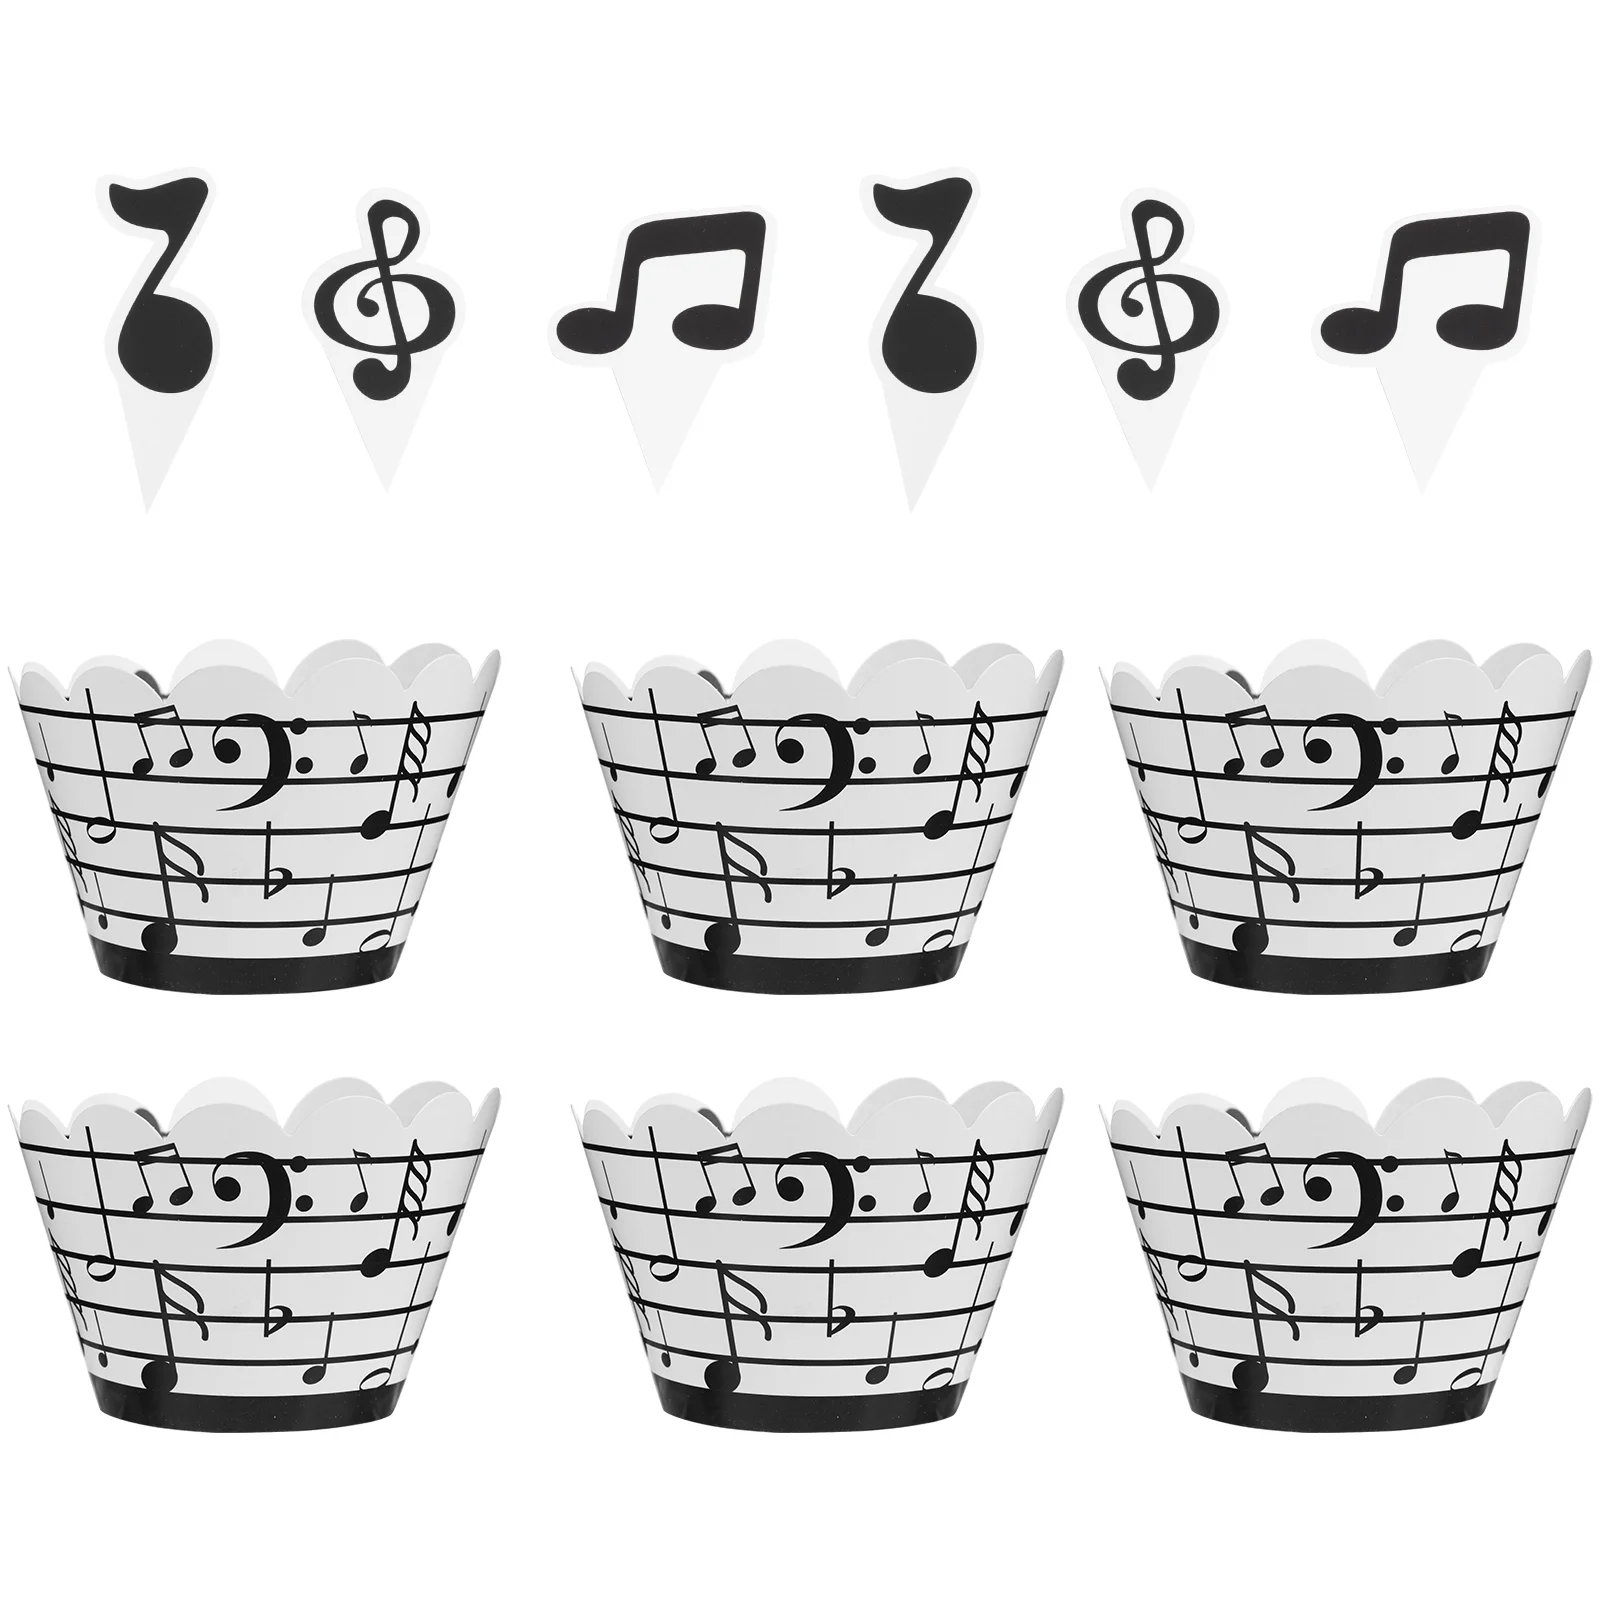 

Music Cupcake Cake Note Musical Muffin Baking Party Cups Liners Topper Picks Decorations Notes Wrapper Wrappers Symbol Birthday